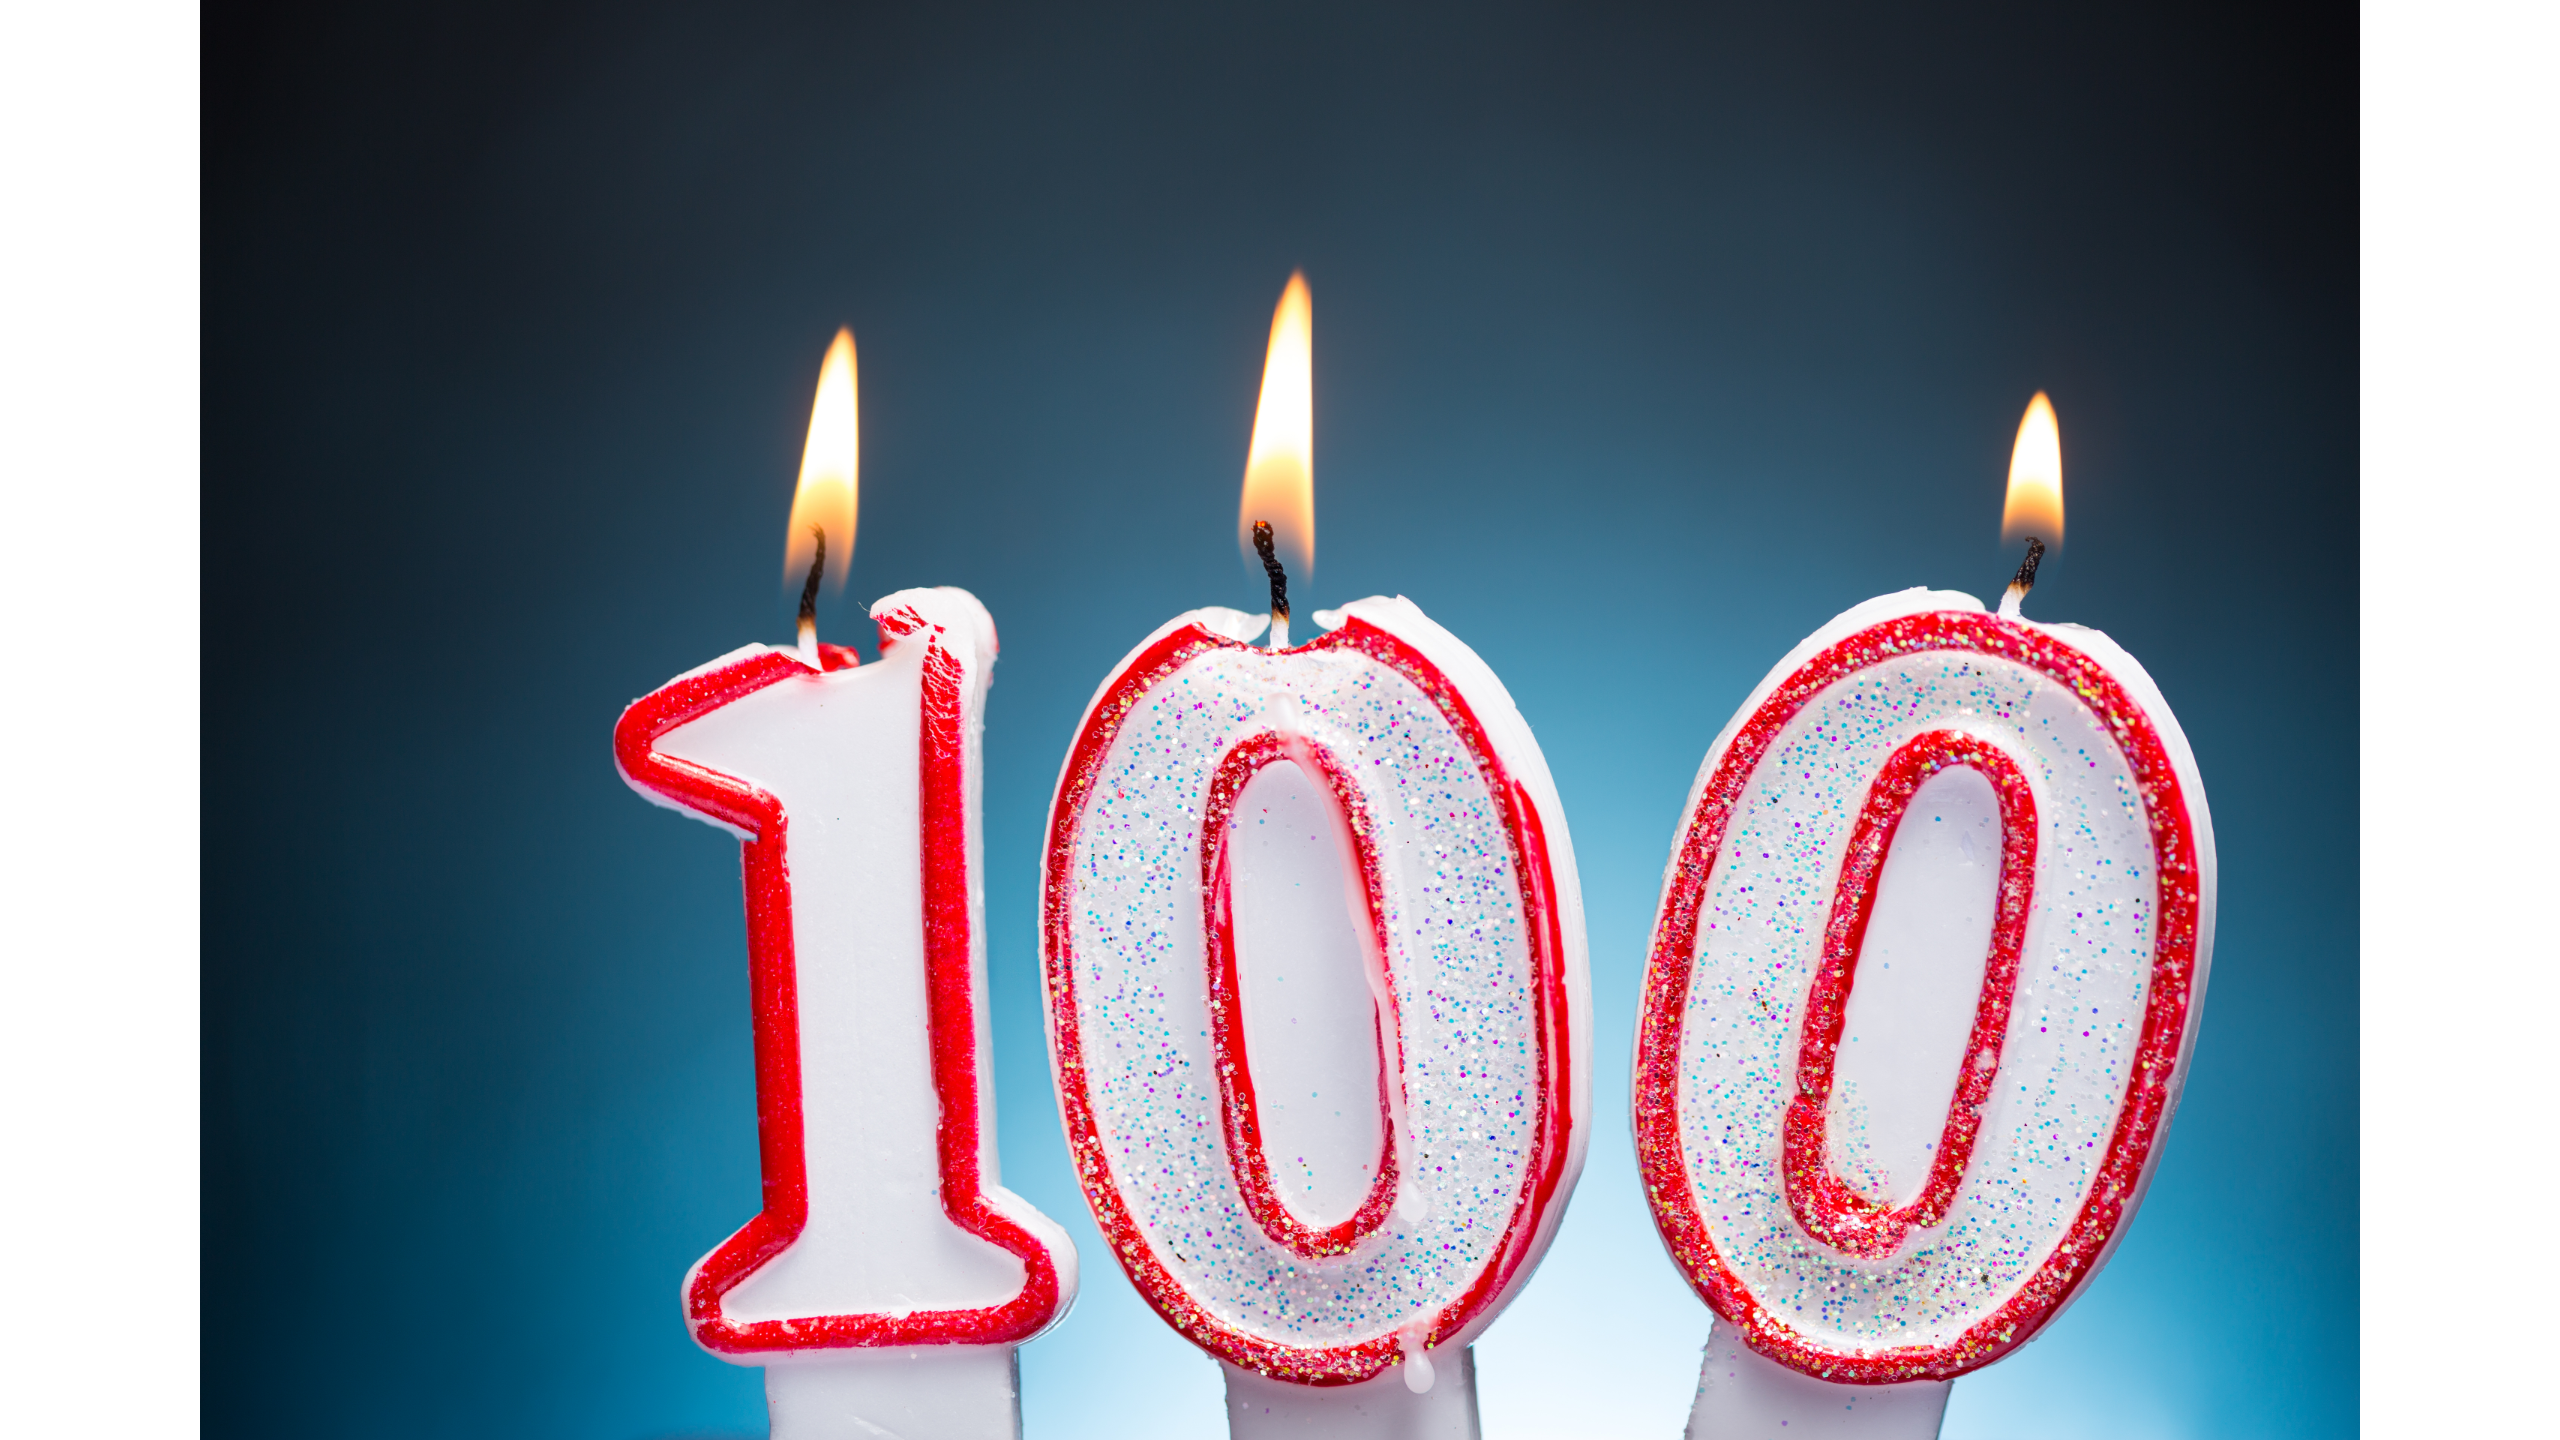 Lit candles spelling out "100".